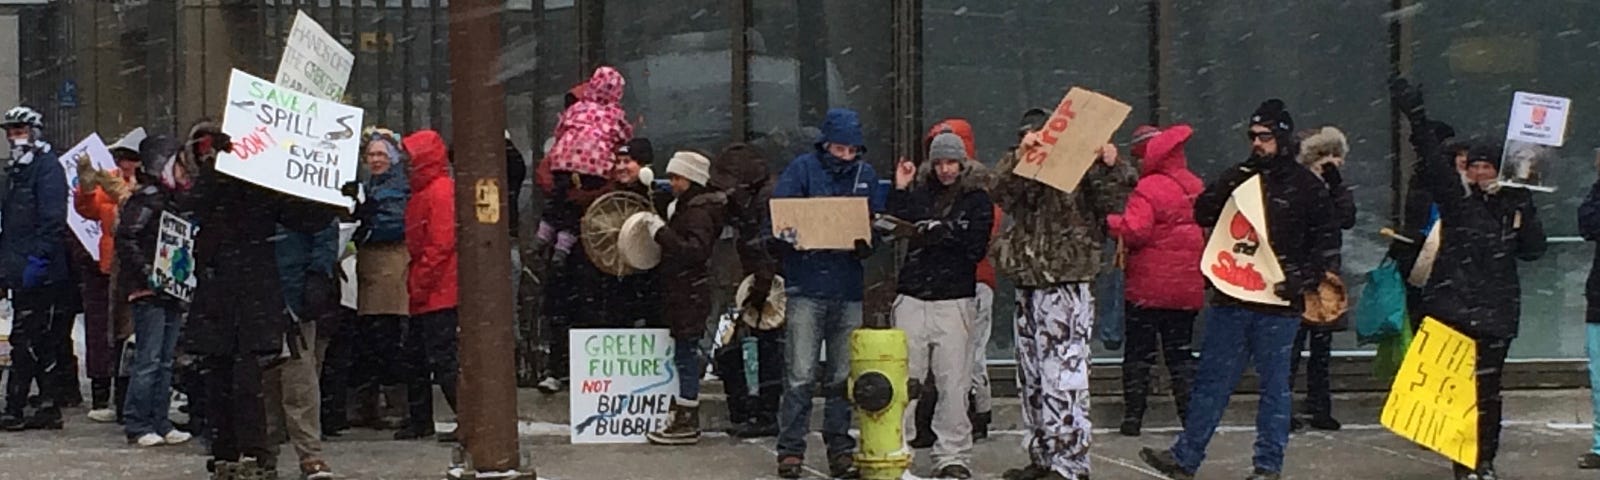 Protestors along a sidewalk, mostly dressed in winter garb, with placard signs and drums, while snow is falling.